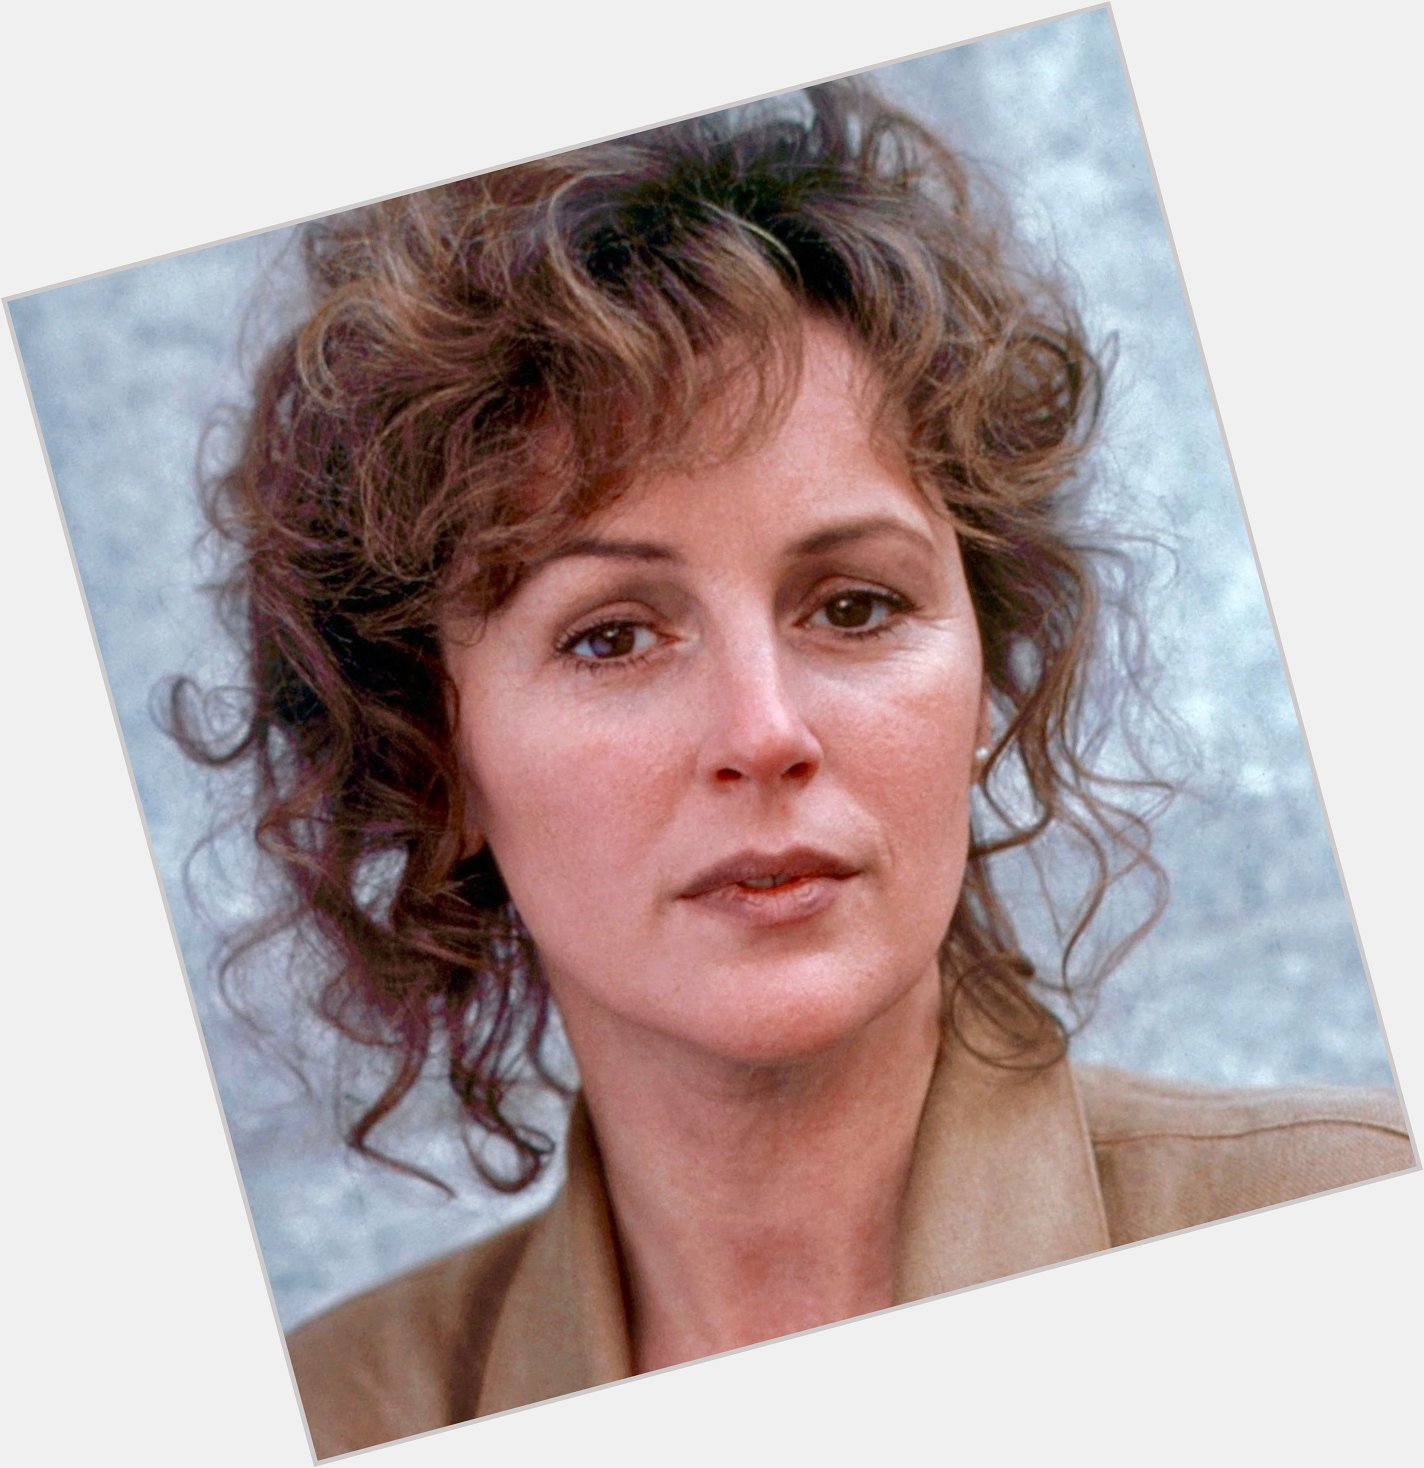 Happy 71st birthday, Bonnie Bedelia!

What\s your favorite role? 